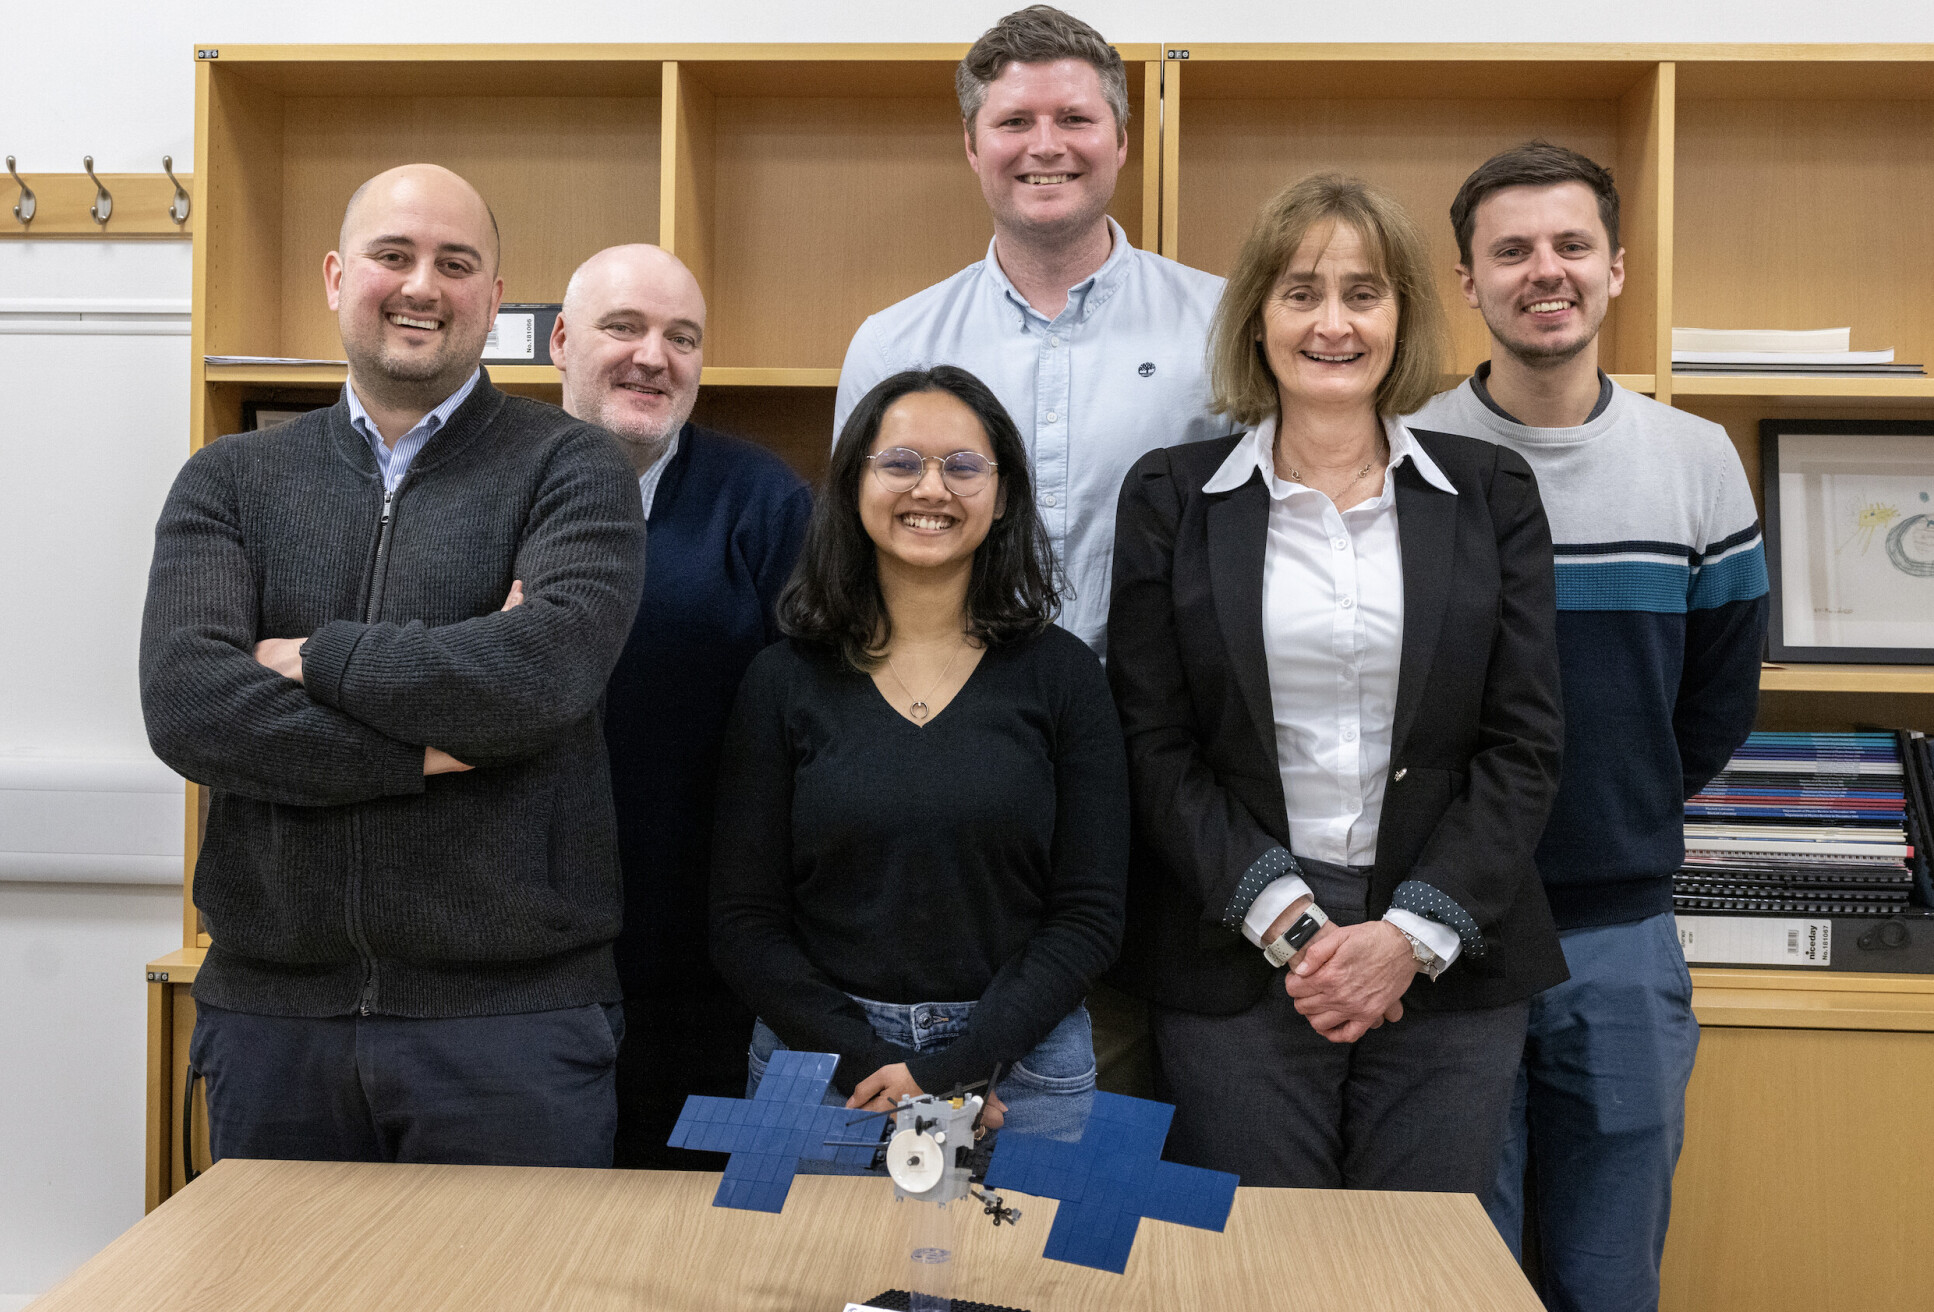 Imperial's JUICE research team, led by Professor Michele Dougherty.